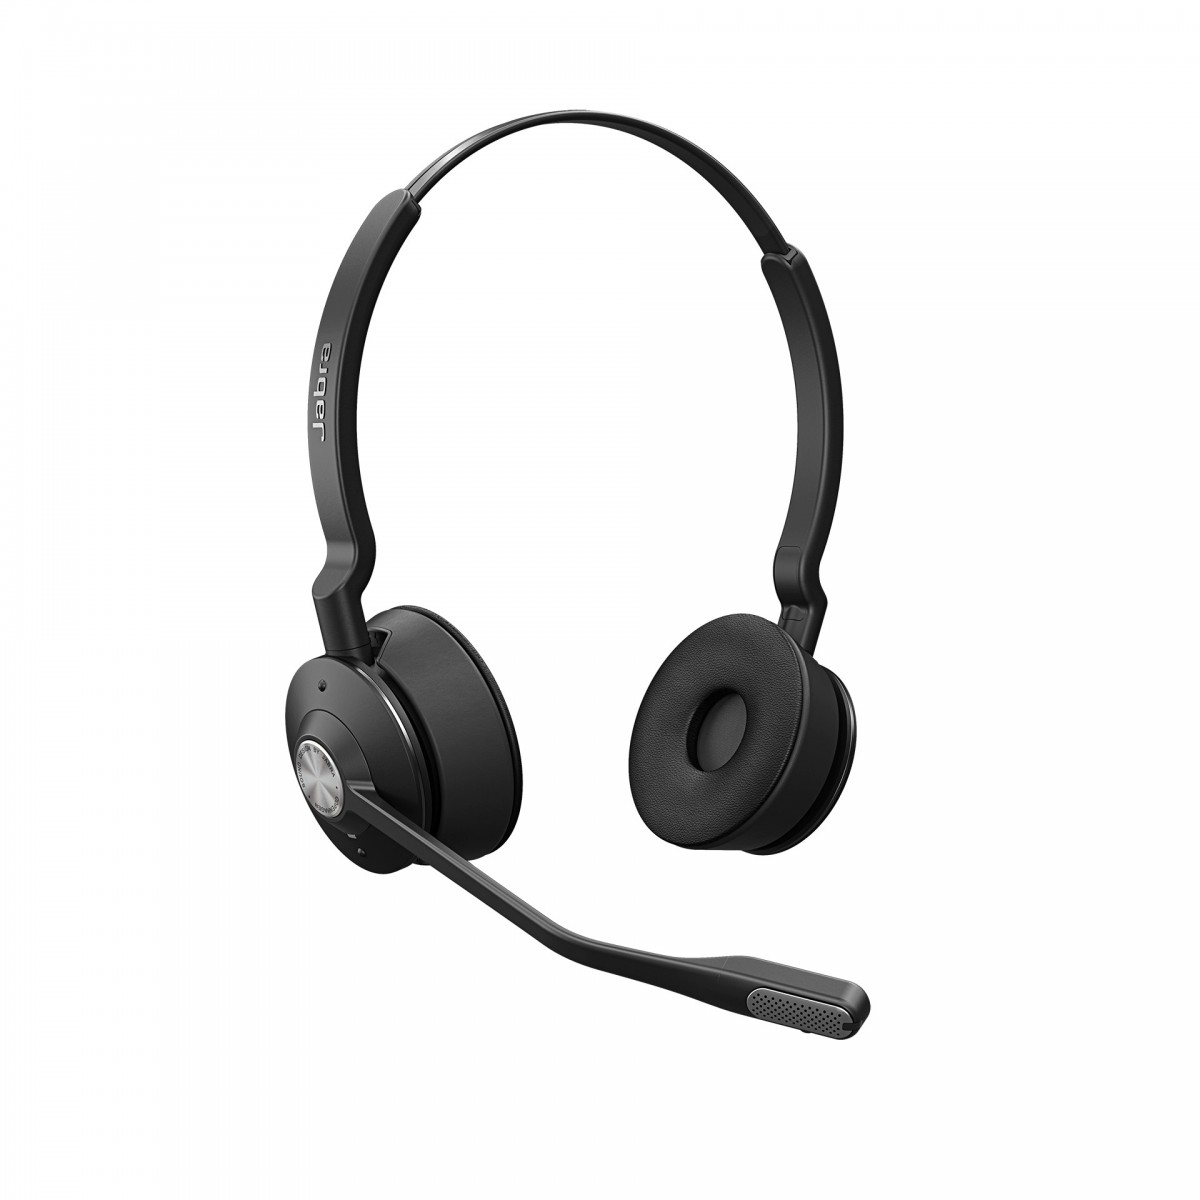 Jabra Engage 65 Stereo - Headset - Head-band - Office/Call center - Black - Binaural - CE - CB - FCC - IC - NOM - NTC - EAC - PS